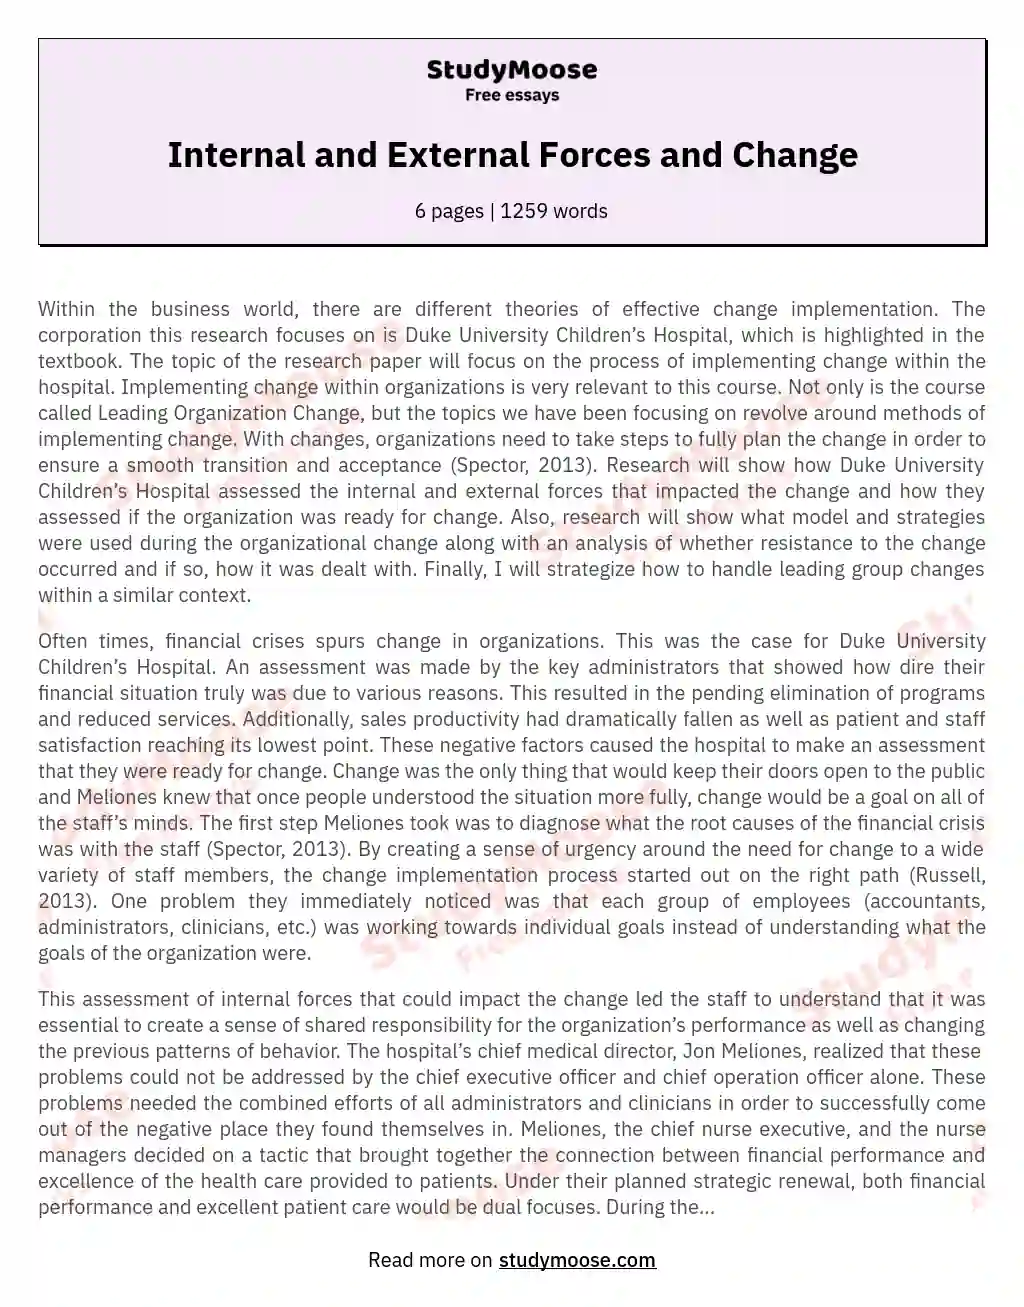 Internal and External Forces and Change essay